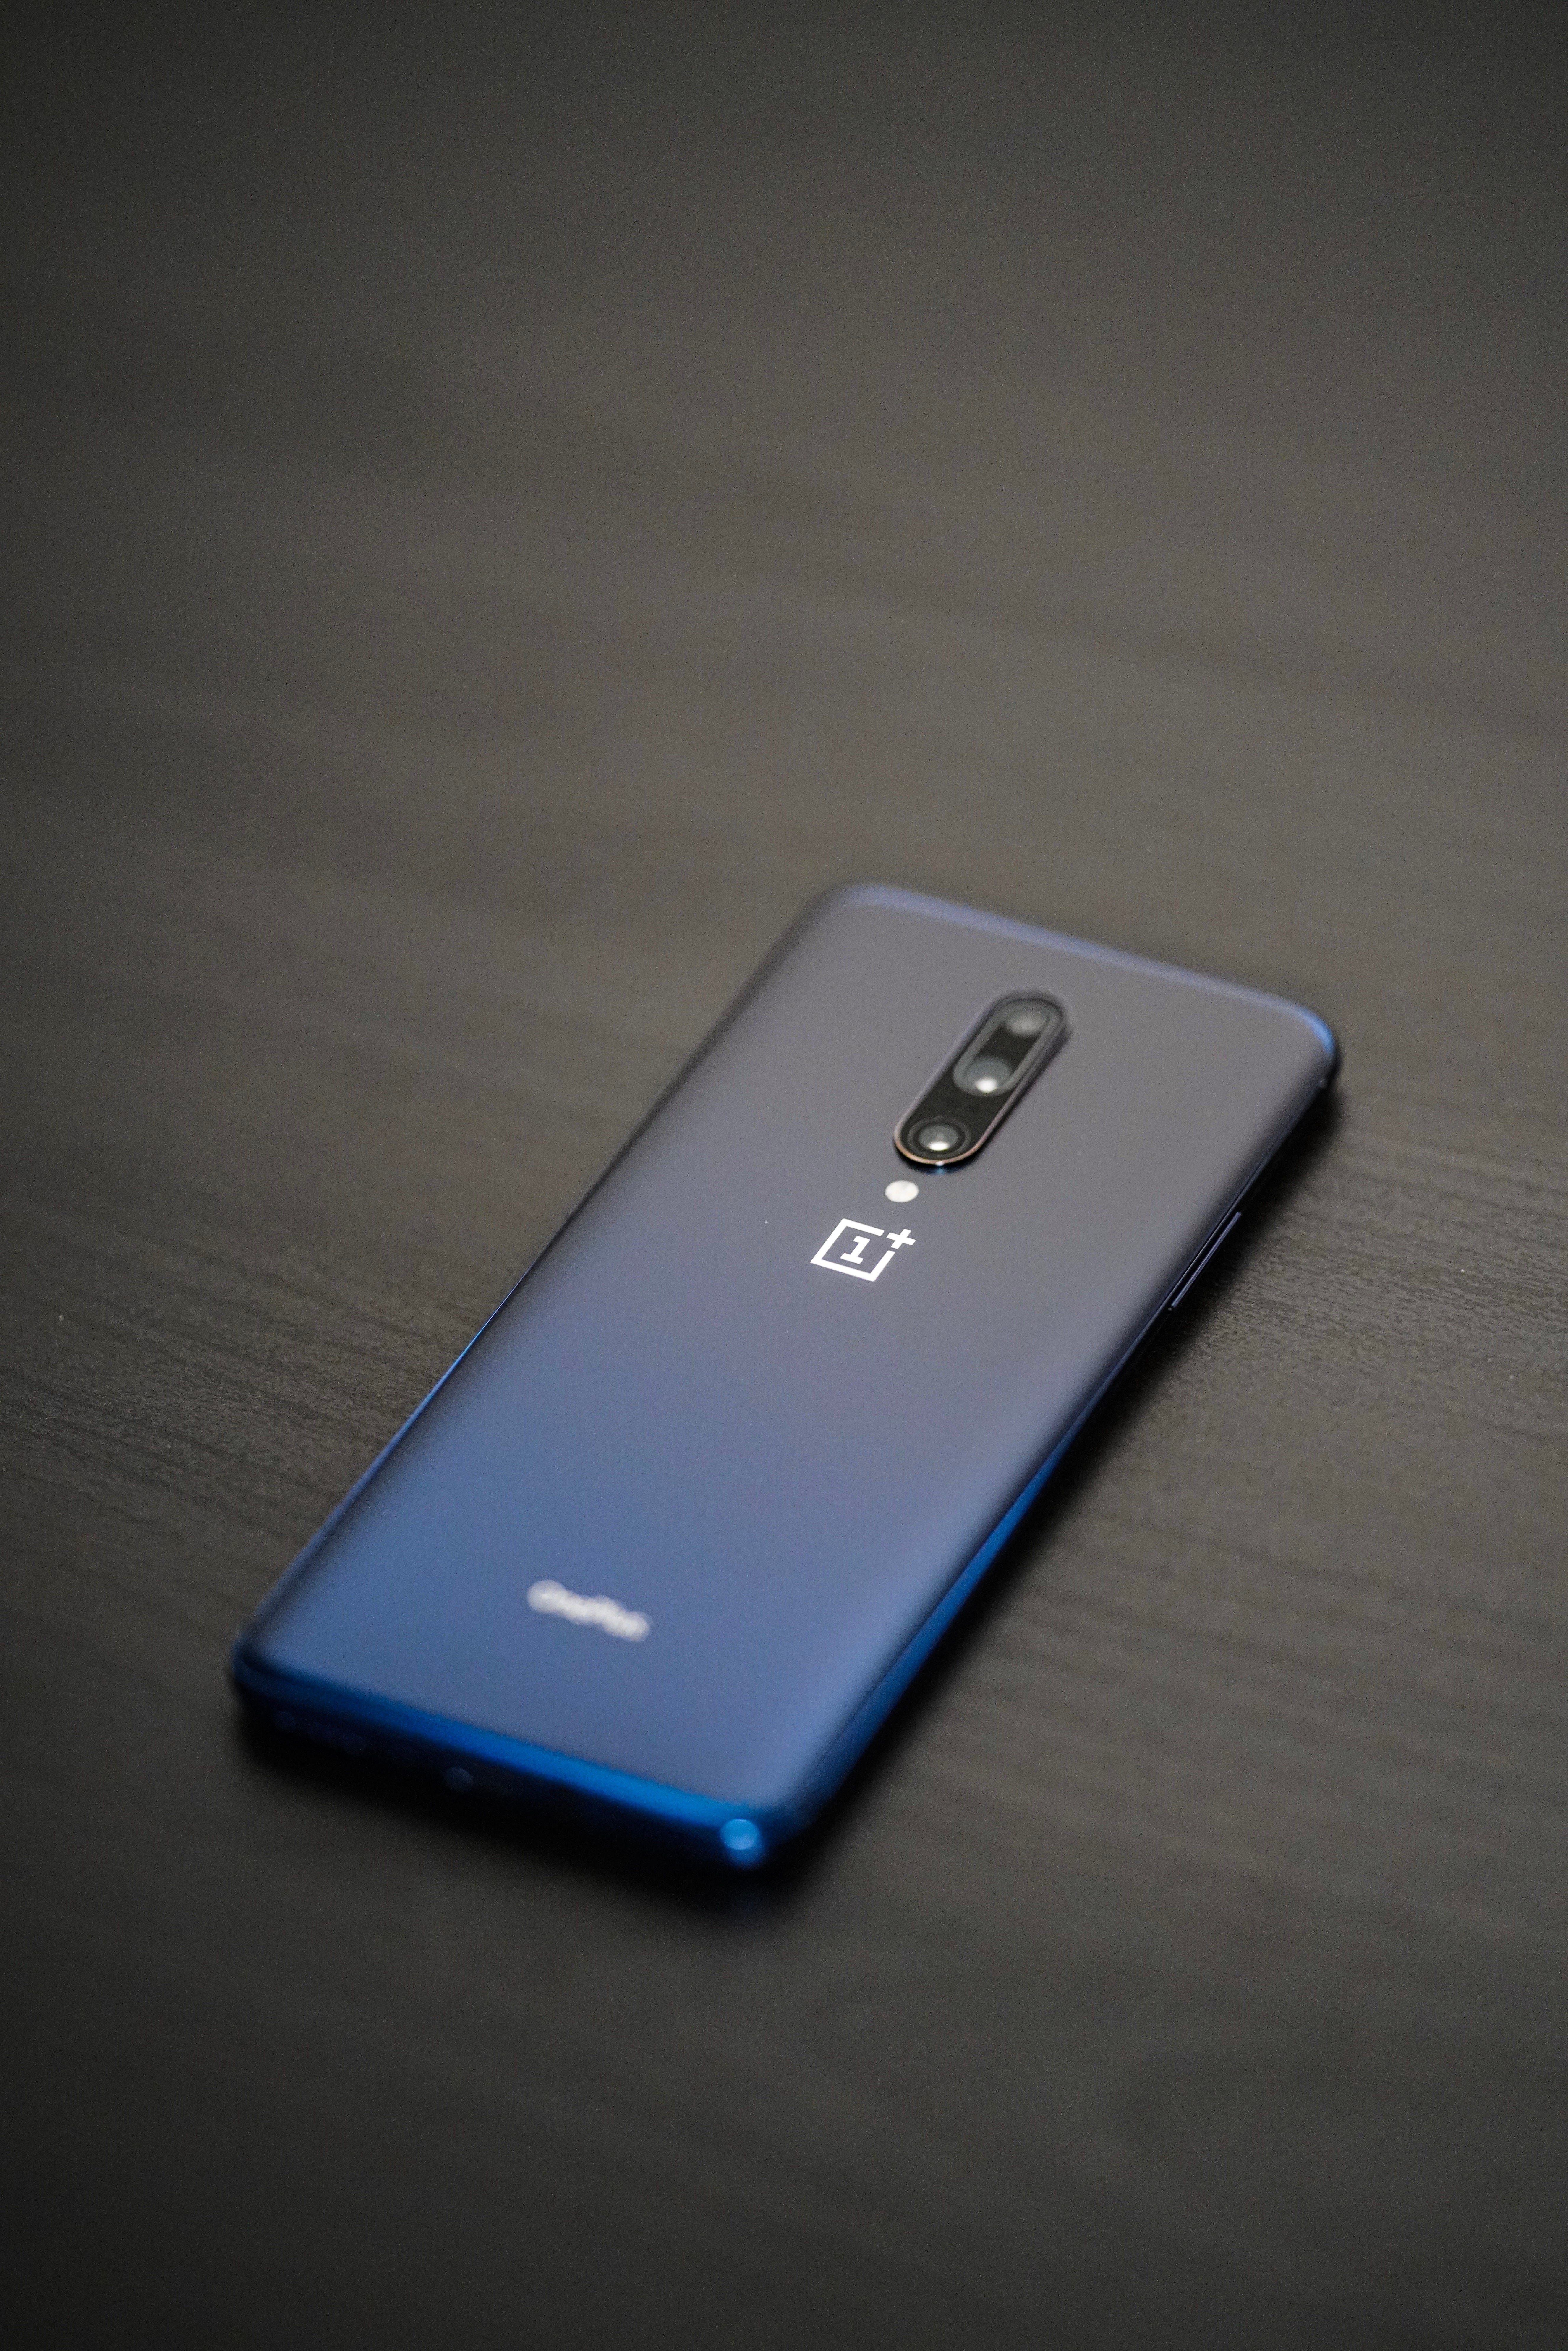 OnePlus terminates the device giveaway to major developers